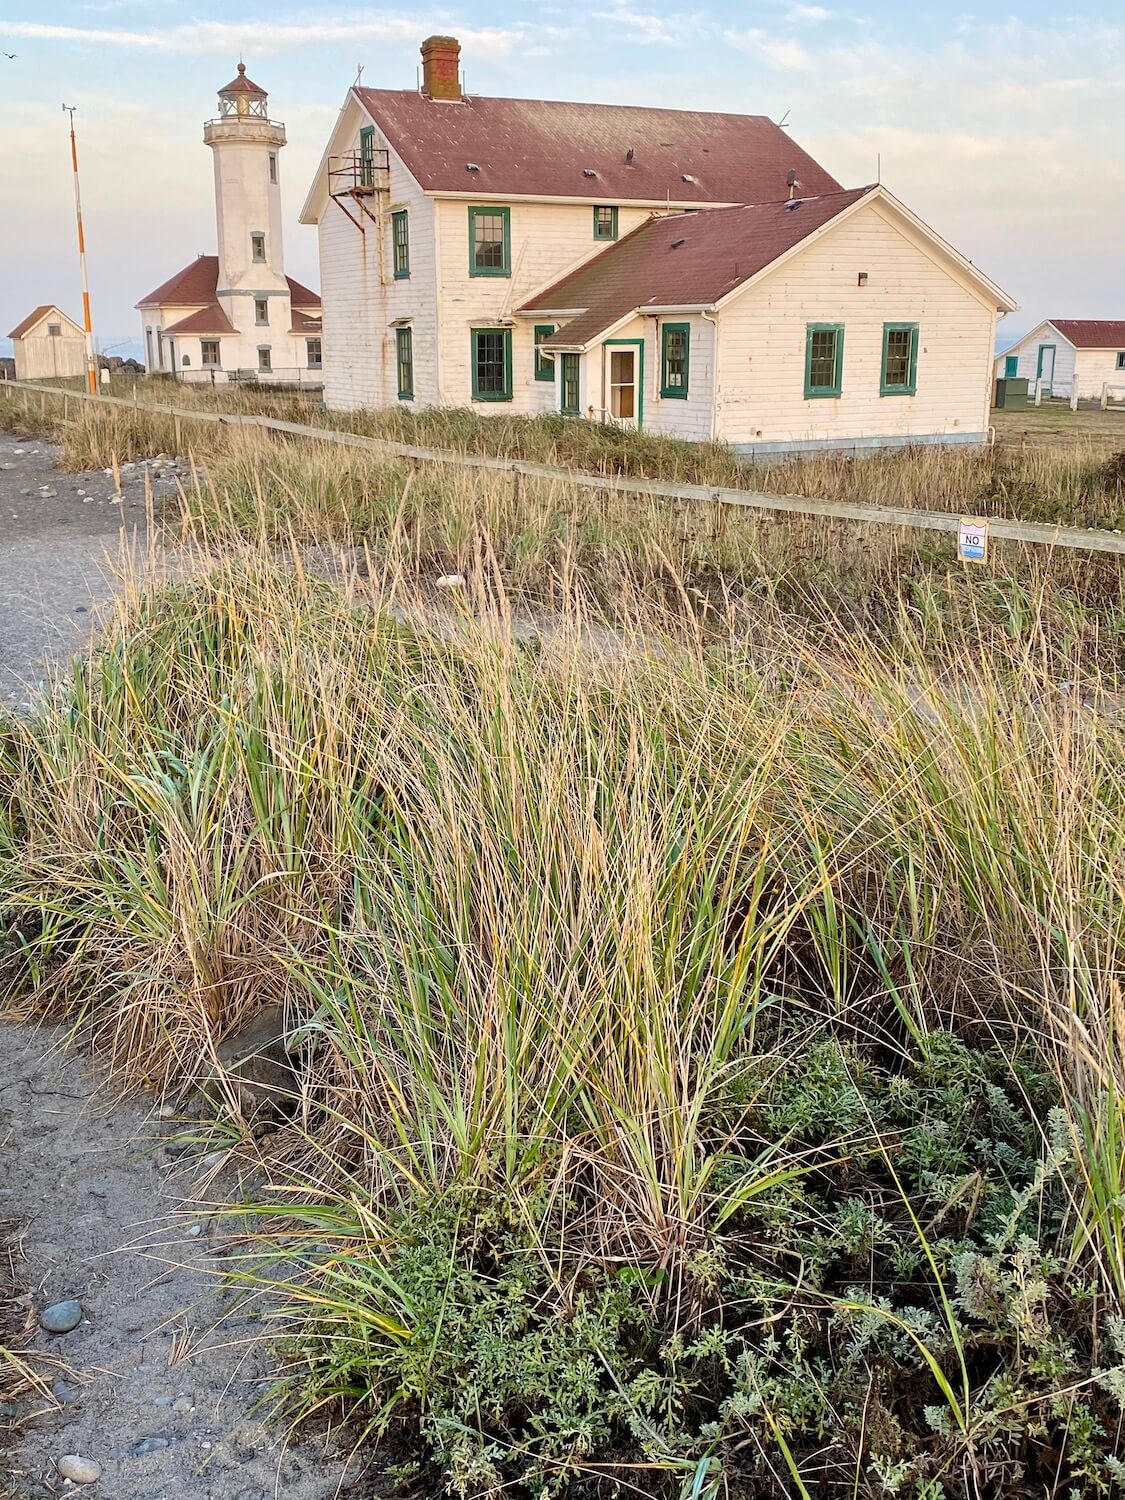 A lighthouse sits in the distance with a red tiled roof and white boarded walls with green trimmed windows. In the near ground is seagrass amongst gray fine sand.